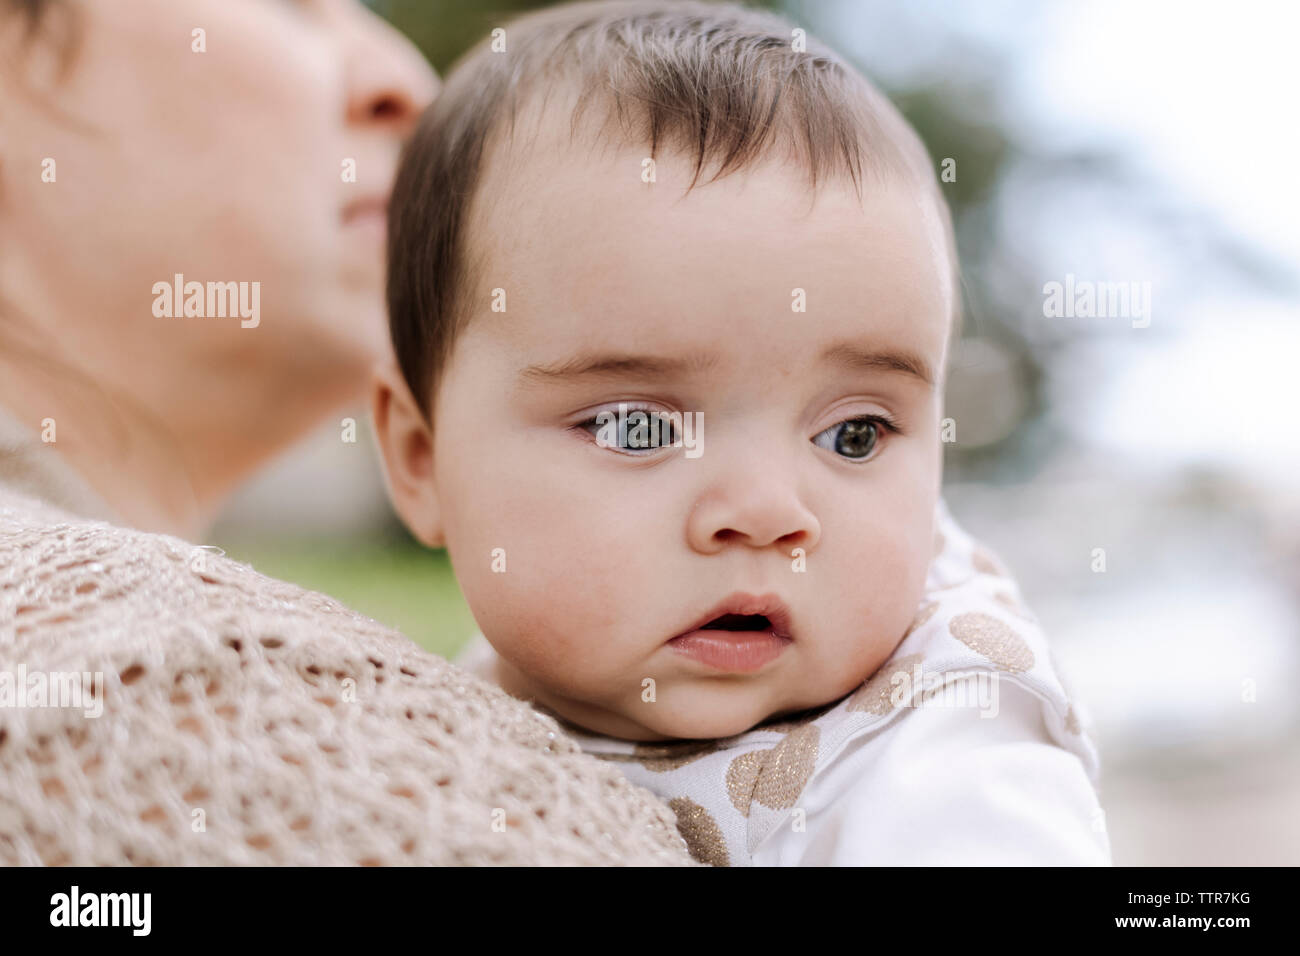 Close up of baby with big eyes outdoor Stock Photo